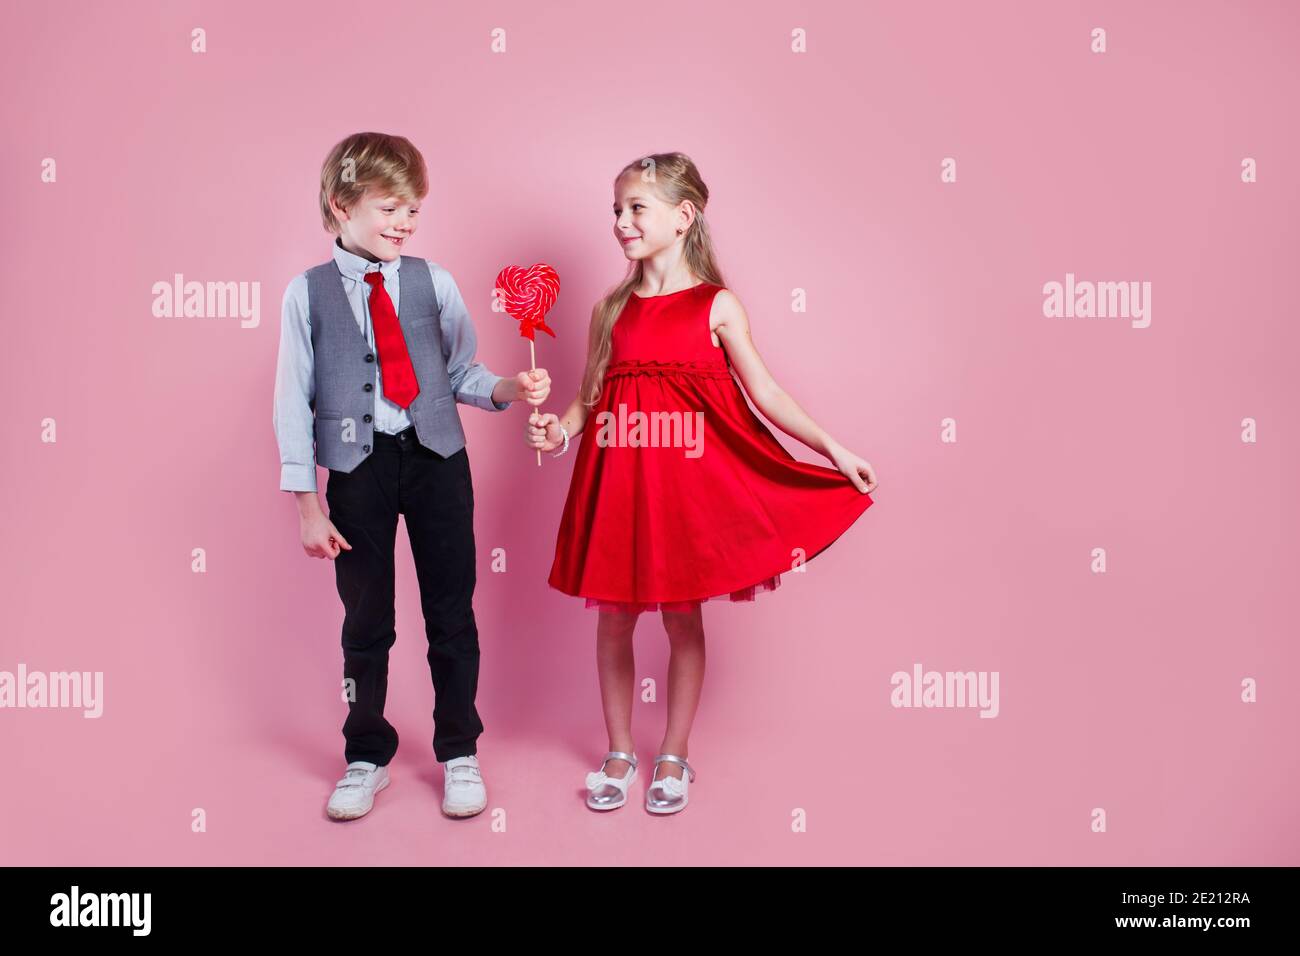 Valentine's day concept. Little boy and girl with candy red lollipop in heart shape. Beautiful children eat sweets. Stock Photo